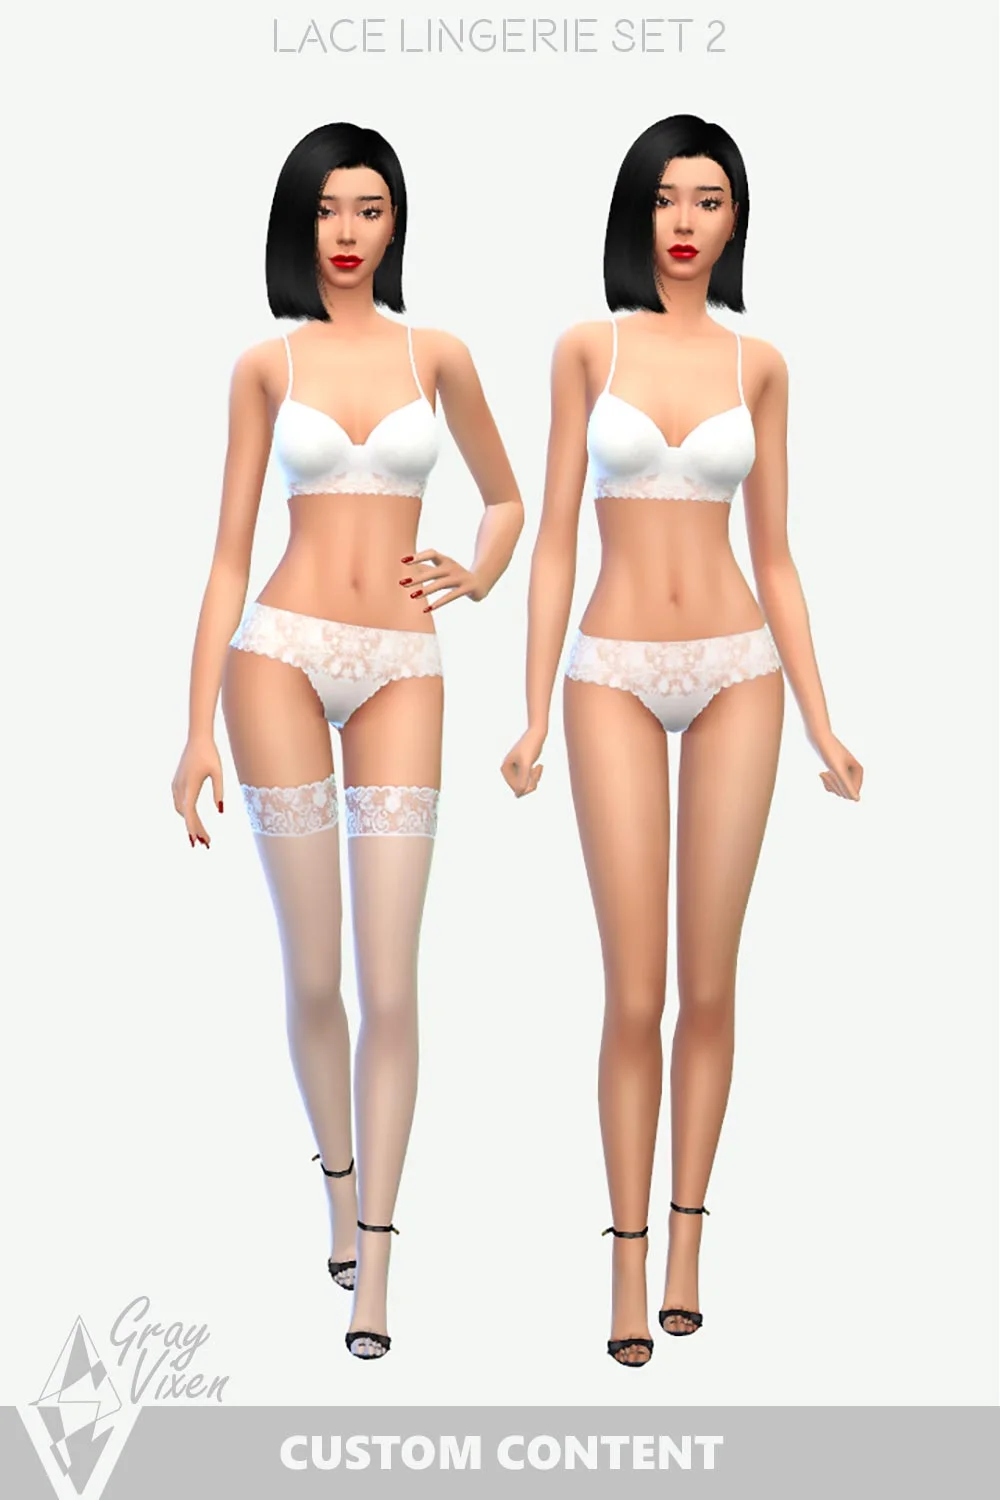 The sims 4 cc sexy lingerie